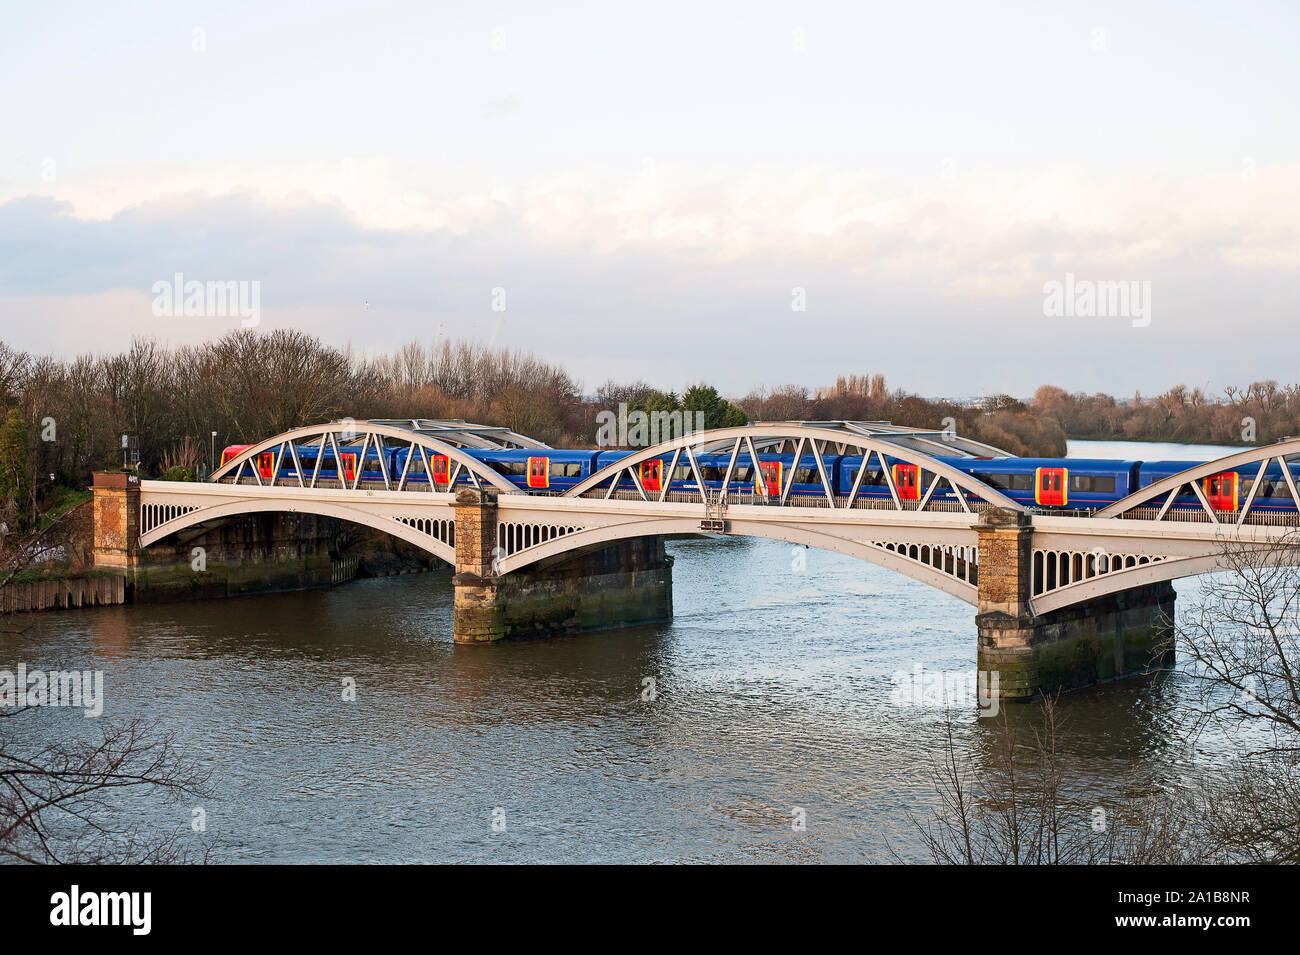 Elevated view of west side of Barnes Railway  Bridge, London SW13 over the River Thames with train crossing. Stock Photo